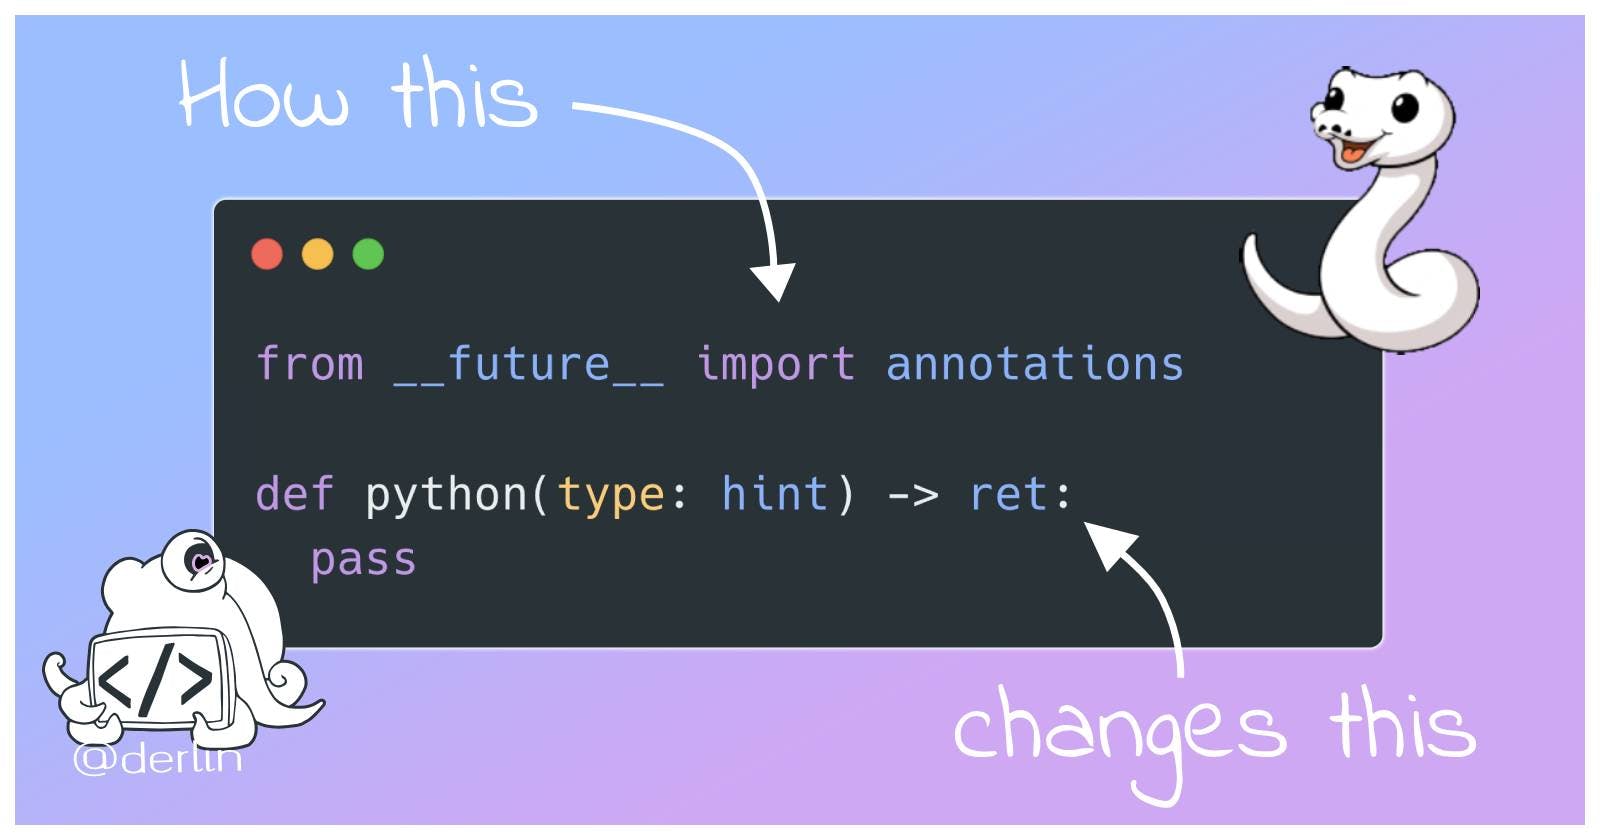 Python, type hints, and future annotations